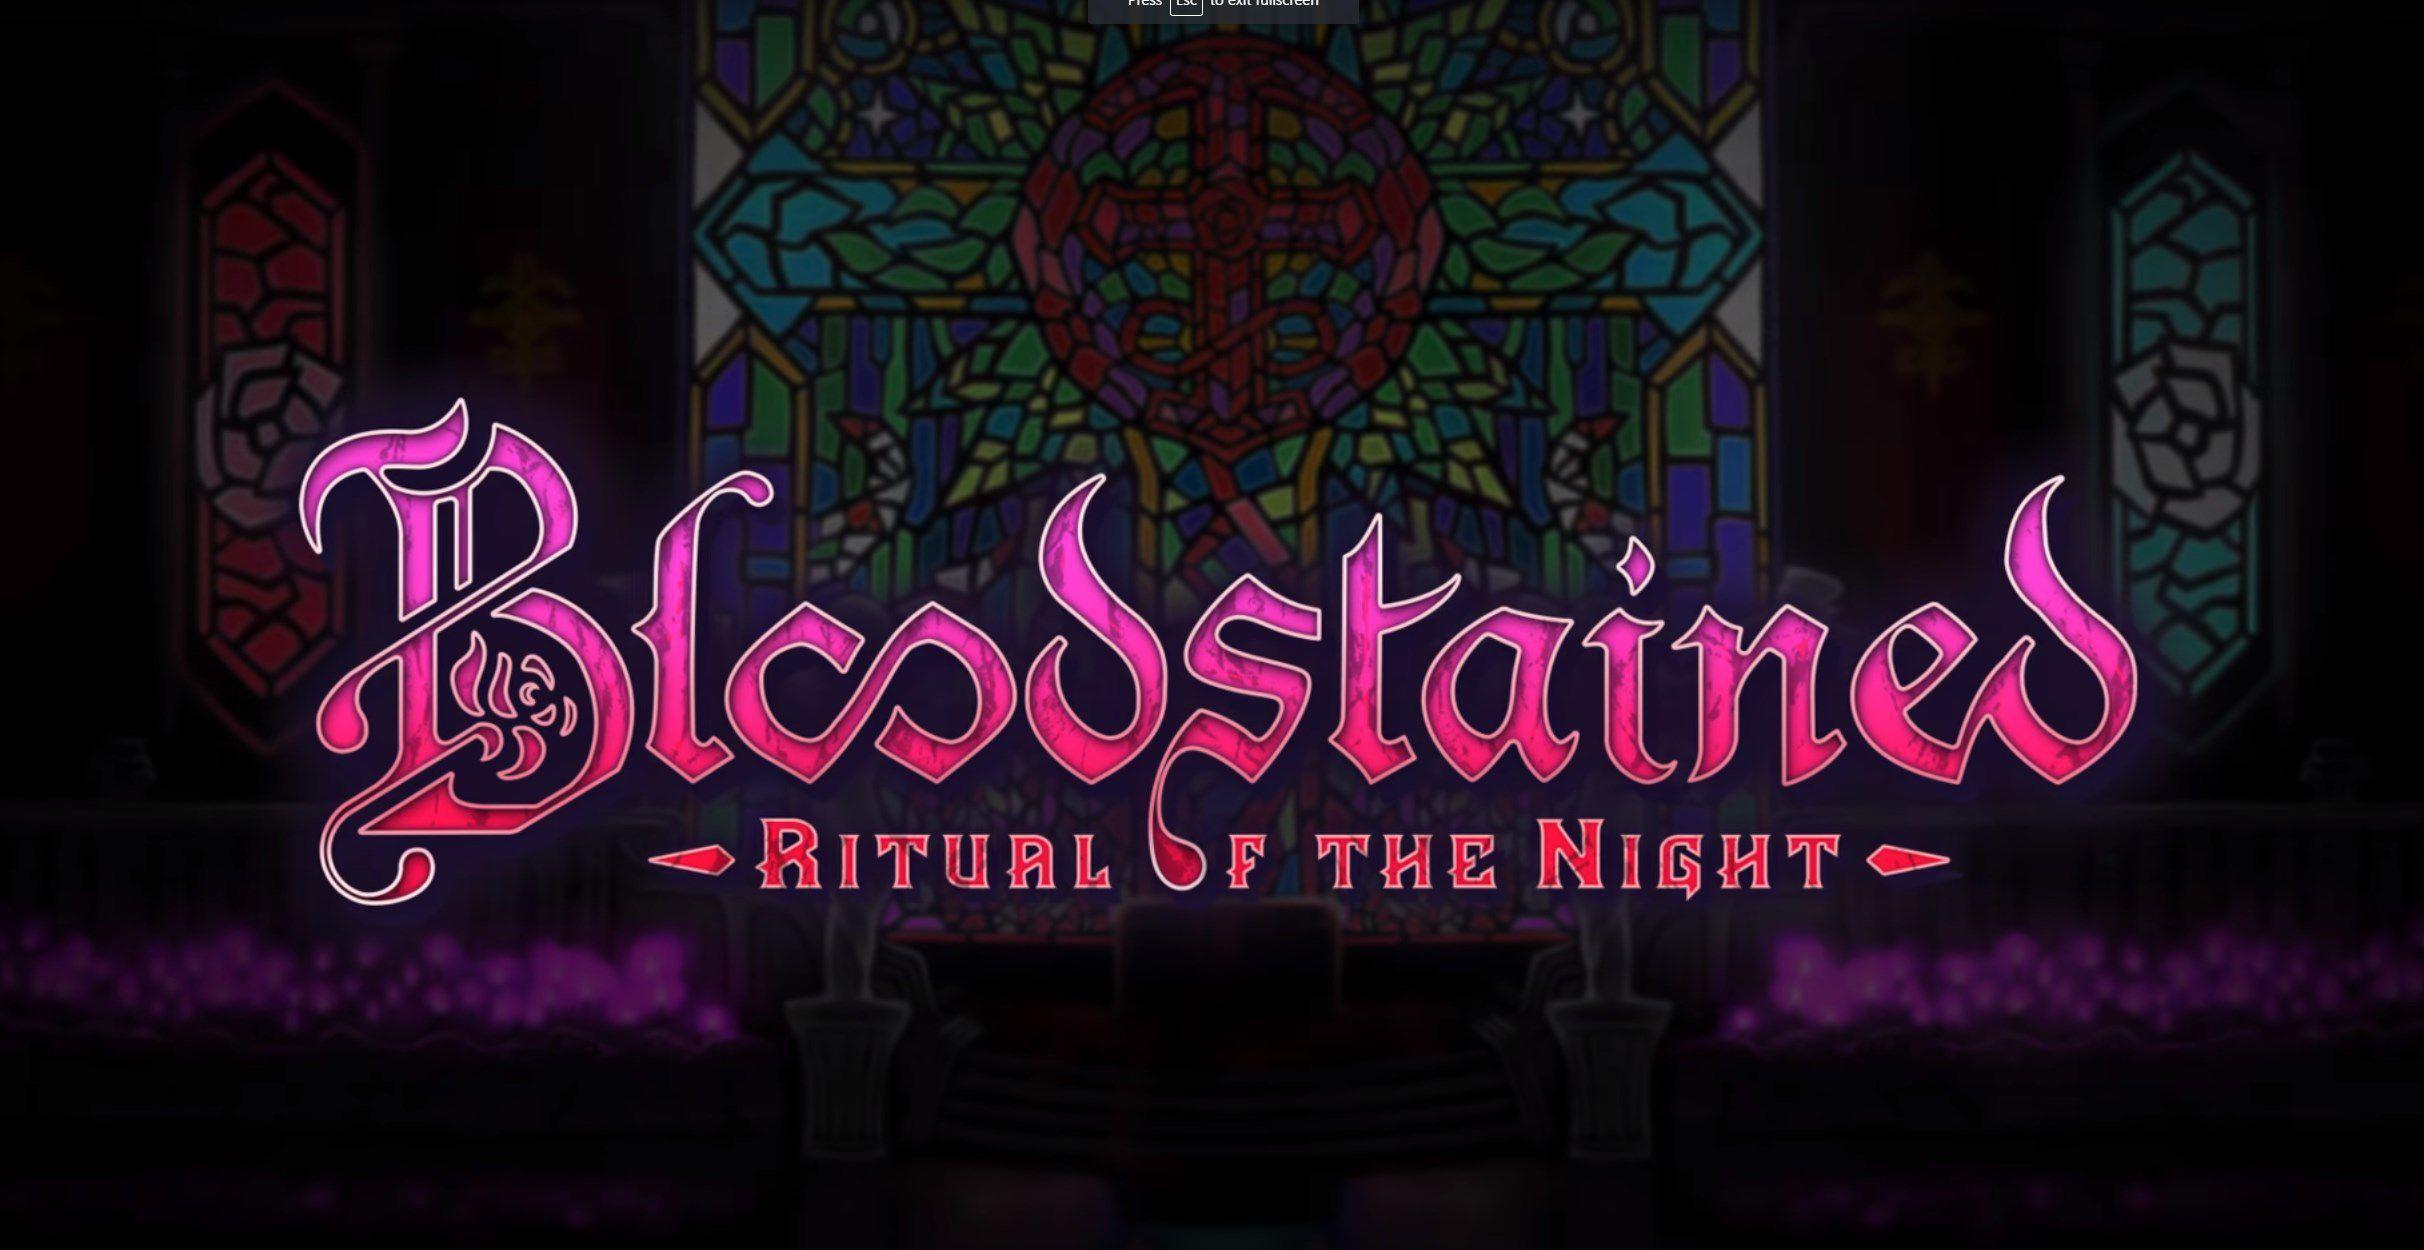 Bloodstained Ritual Of The Night Wallpaper Backgrounds